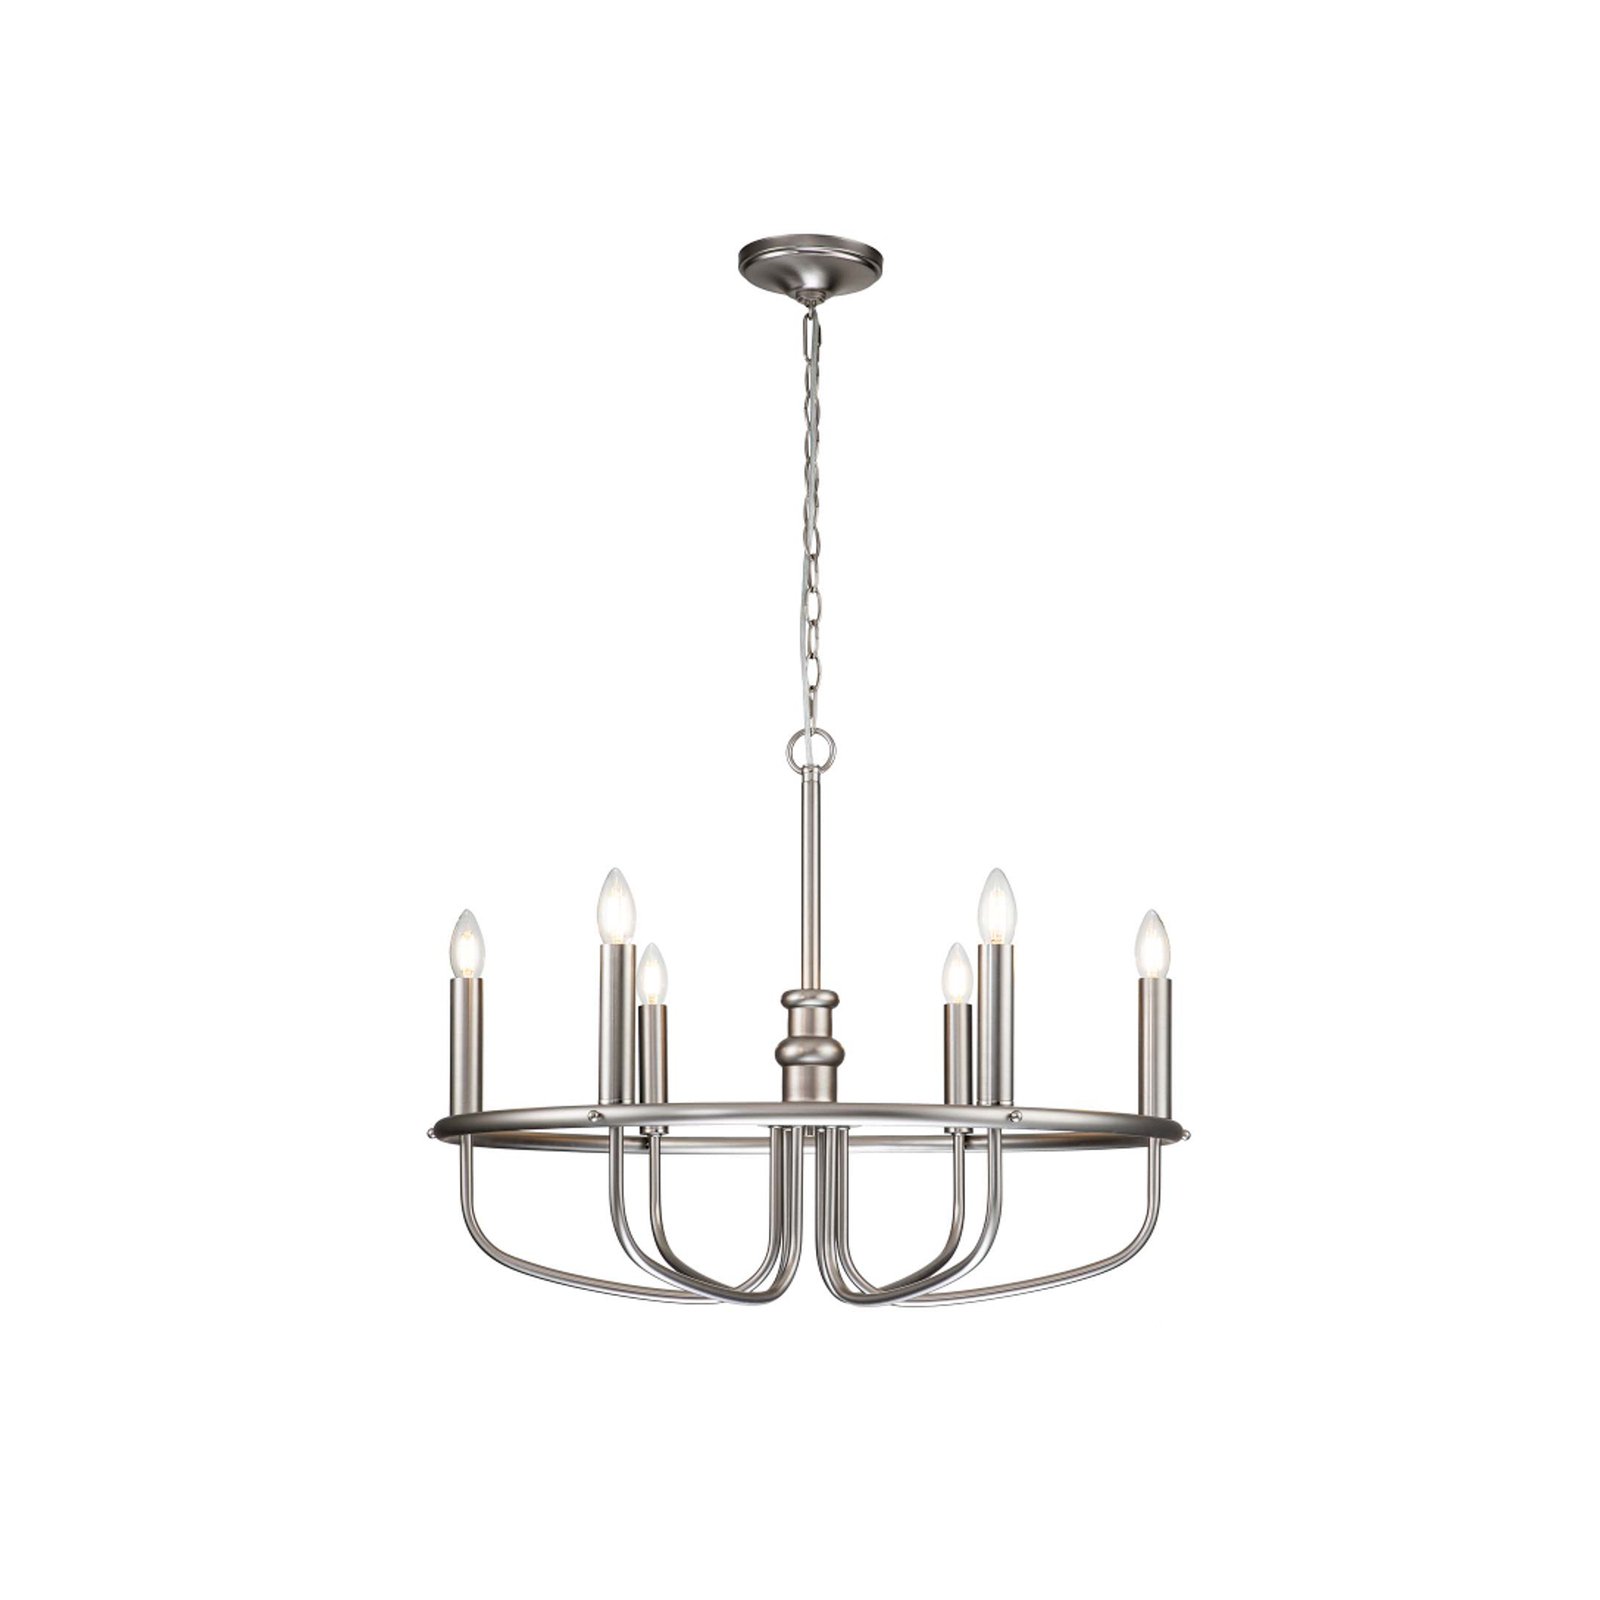 Capitol Hill chandelier, 6-bulb, brushed nickel